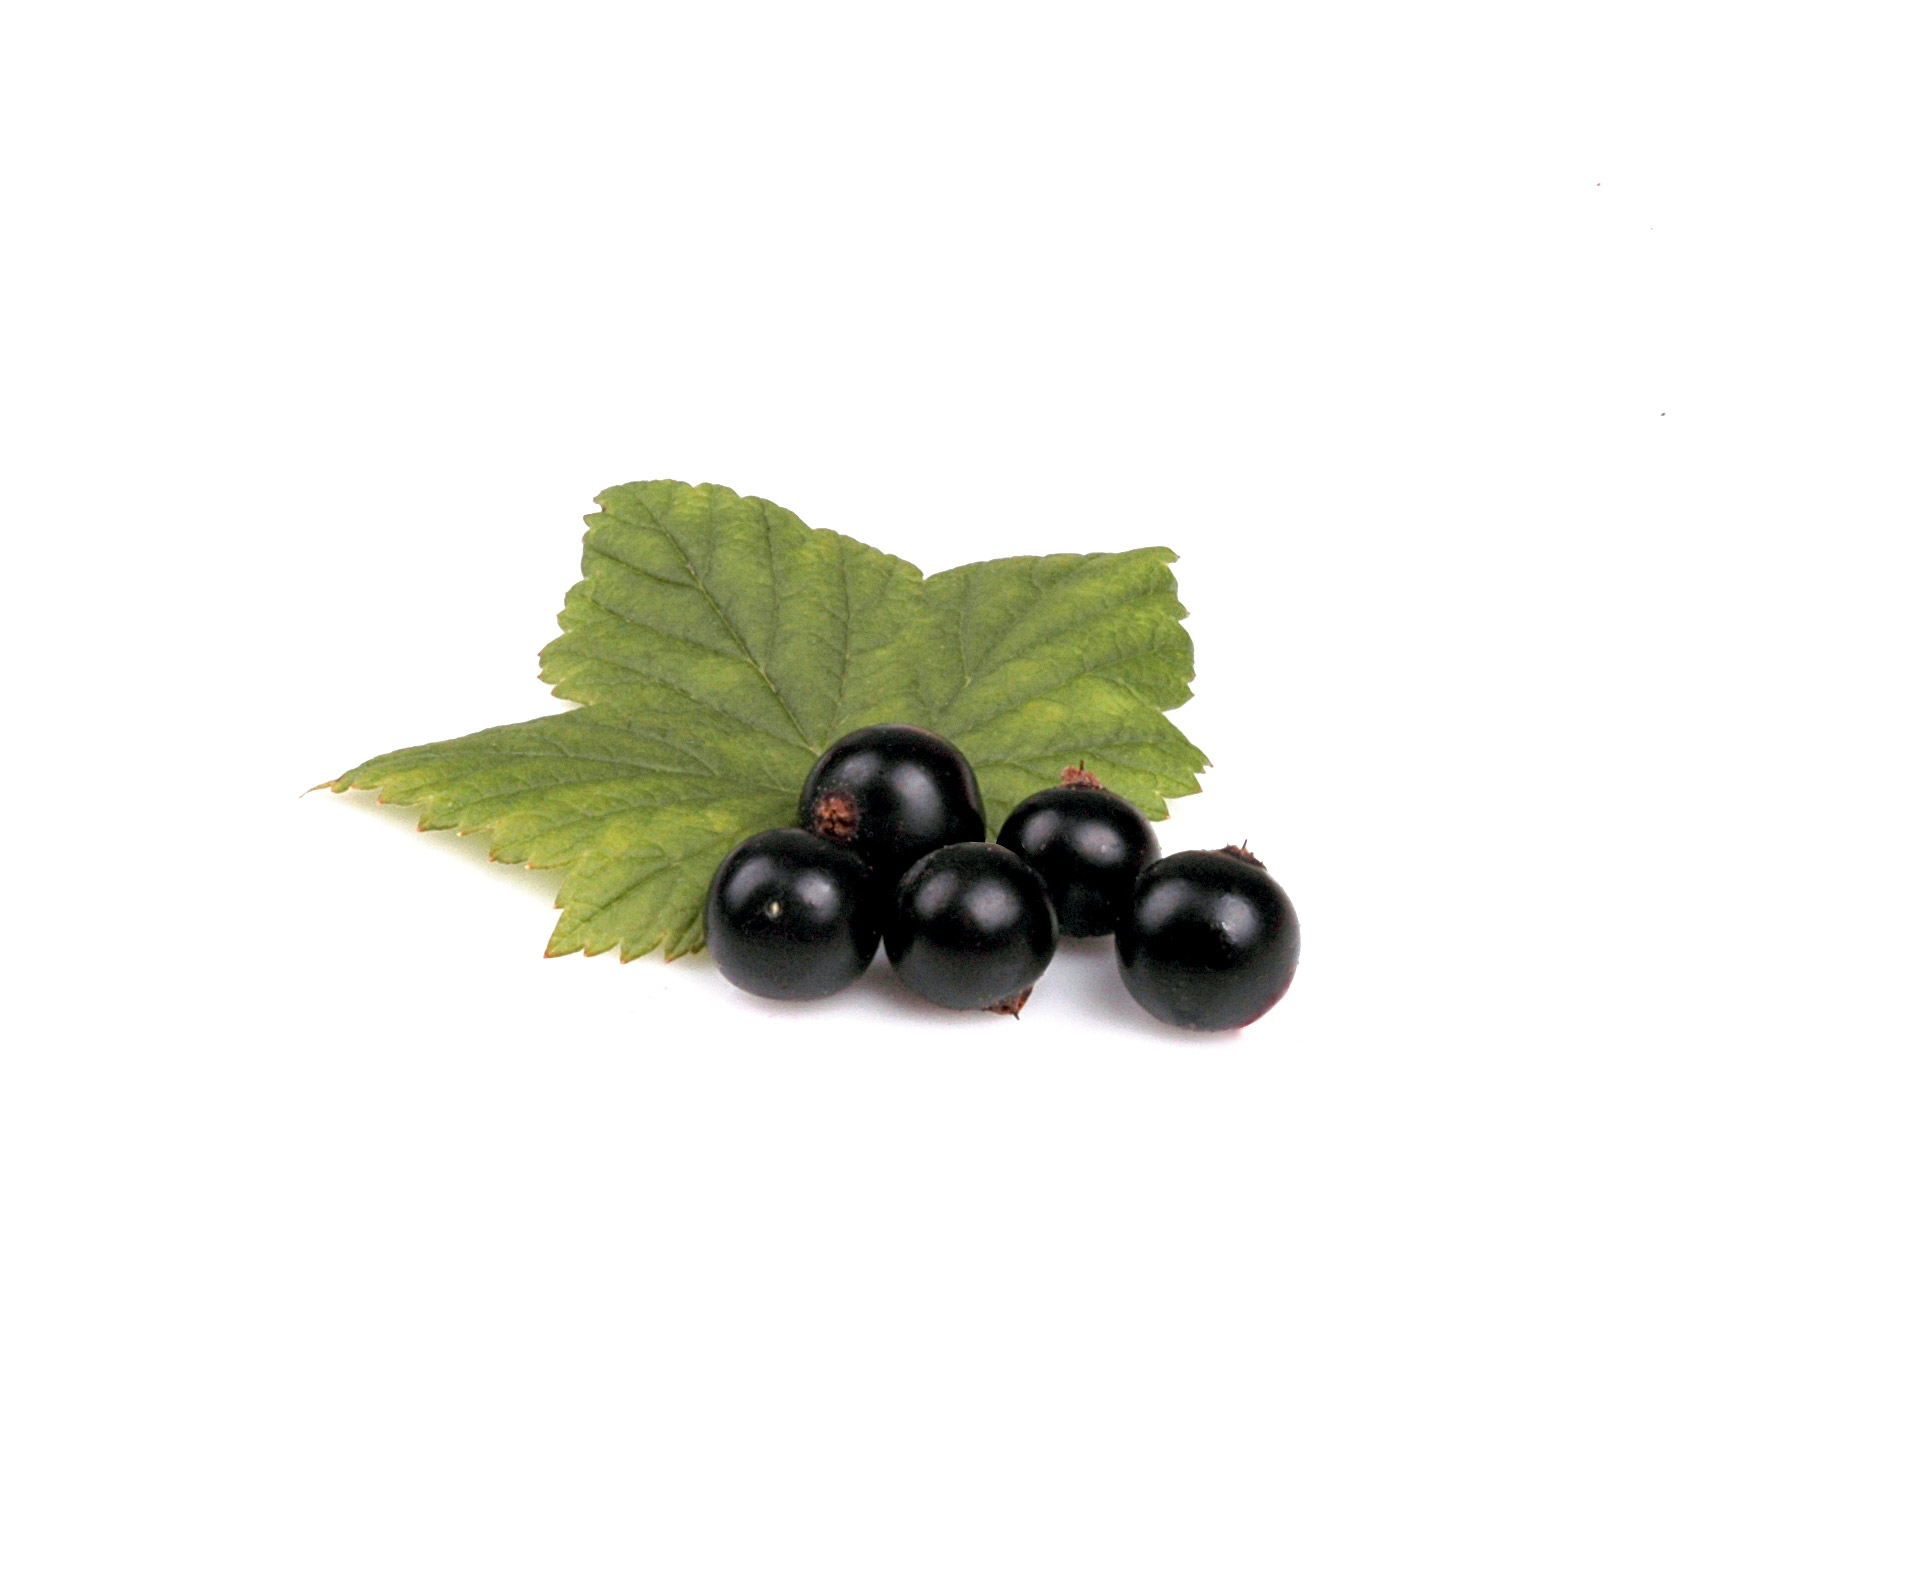 Blackcurrants are also especially rich in Vitamin C - containing more than three times as much as an orange! They can even help prevent joint inflammation, eyestrain and urinary infections.